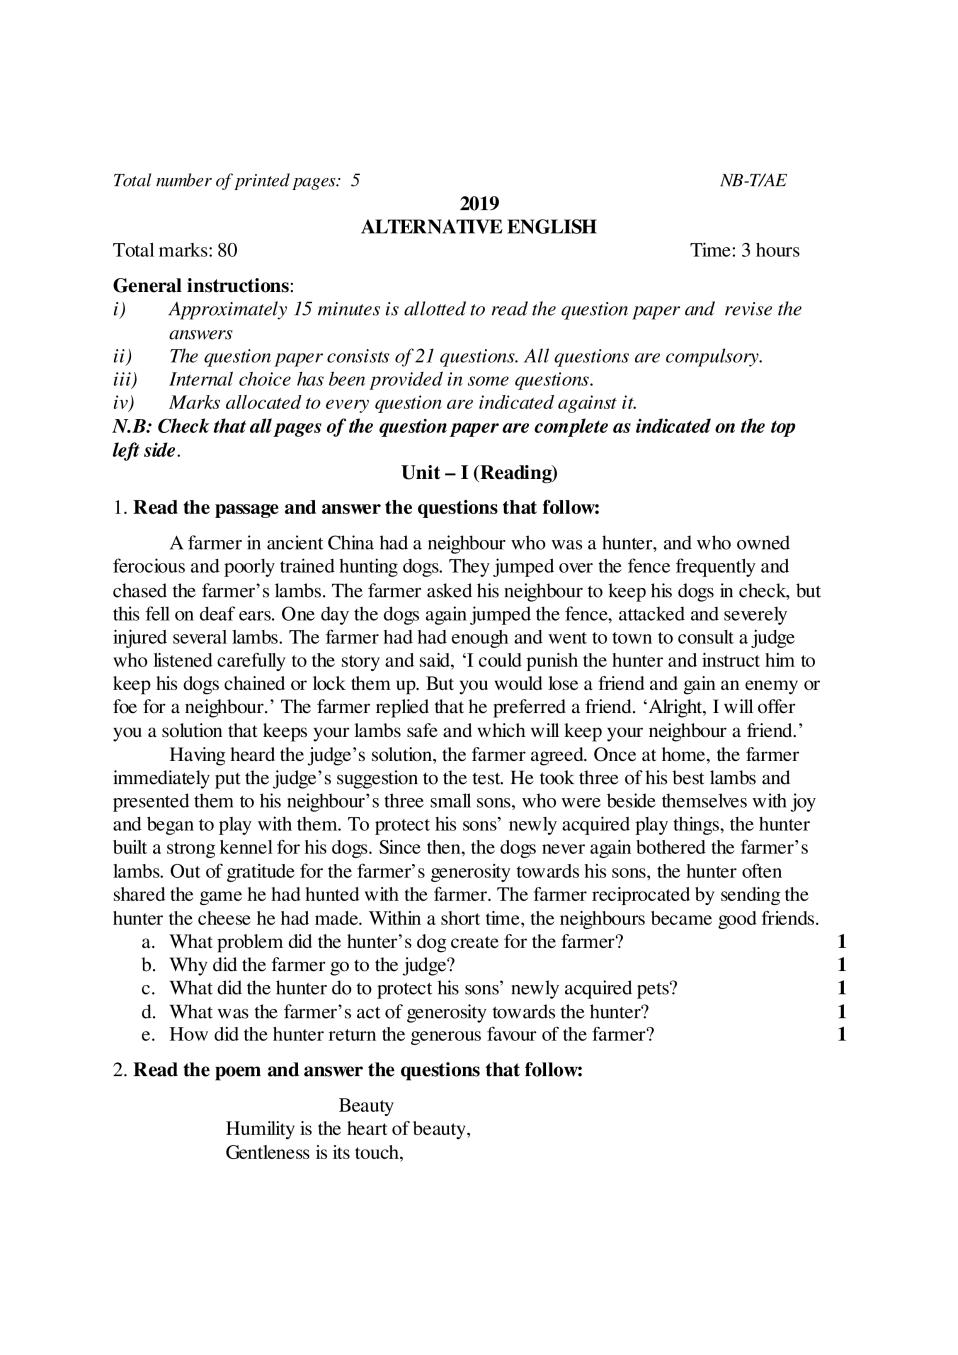 NBSE Class 10 Question Paper 2019 for Alternative English - Page 1